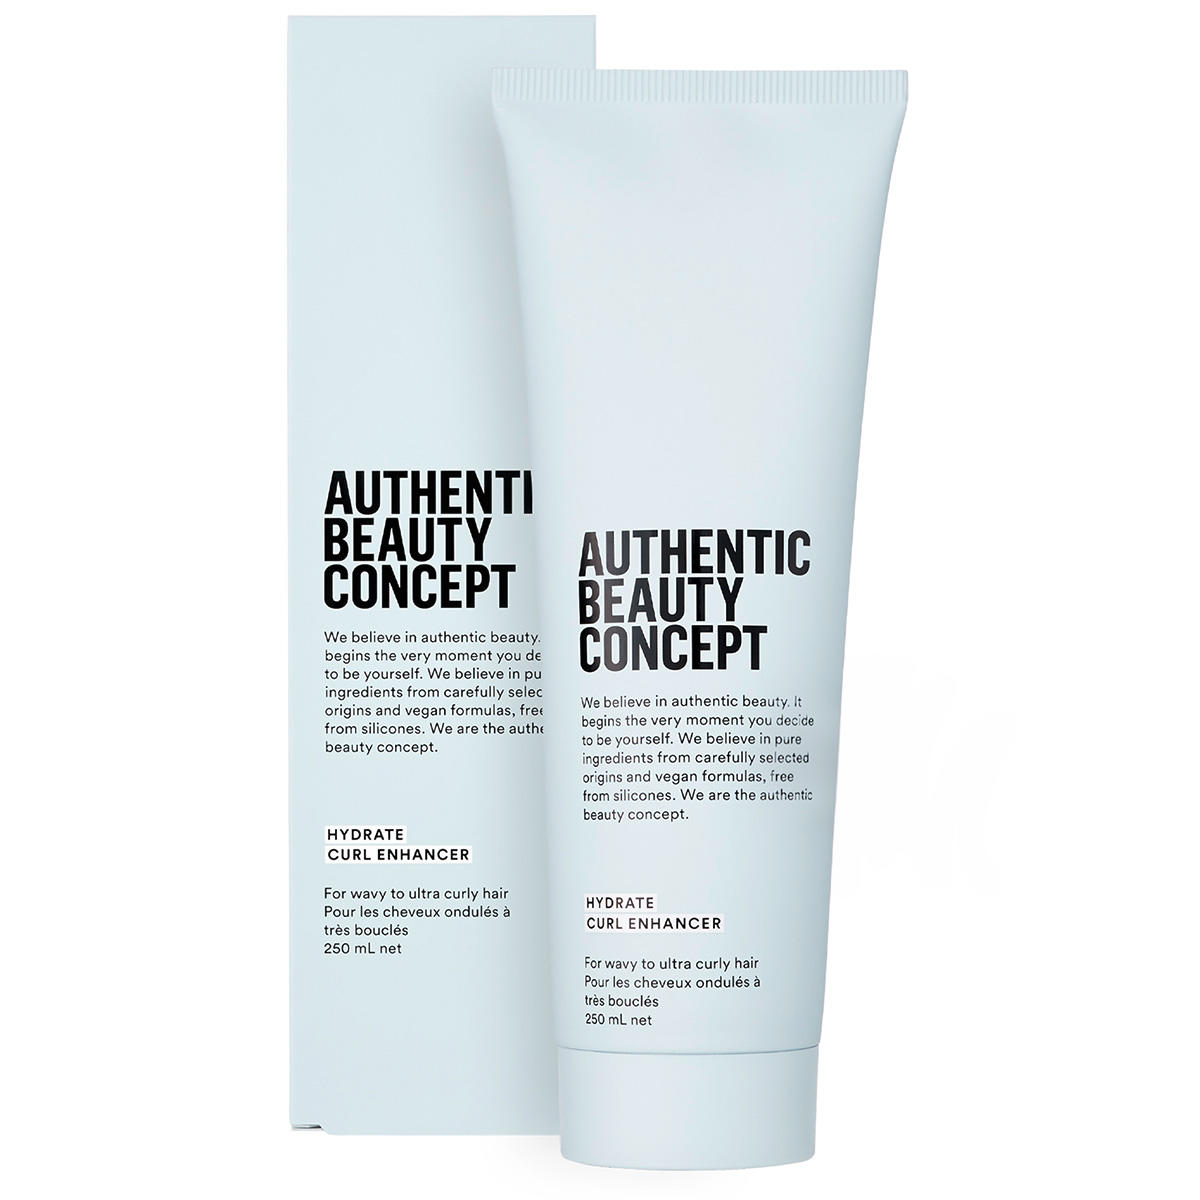 Authentic Beauty Concept Hydrate Enhancer 250 ml - 2